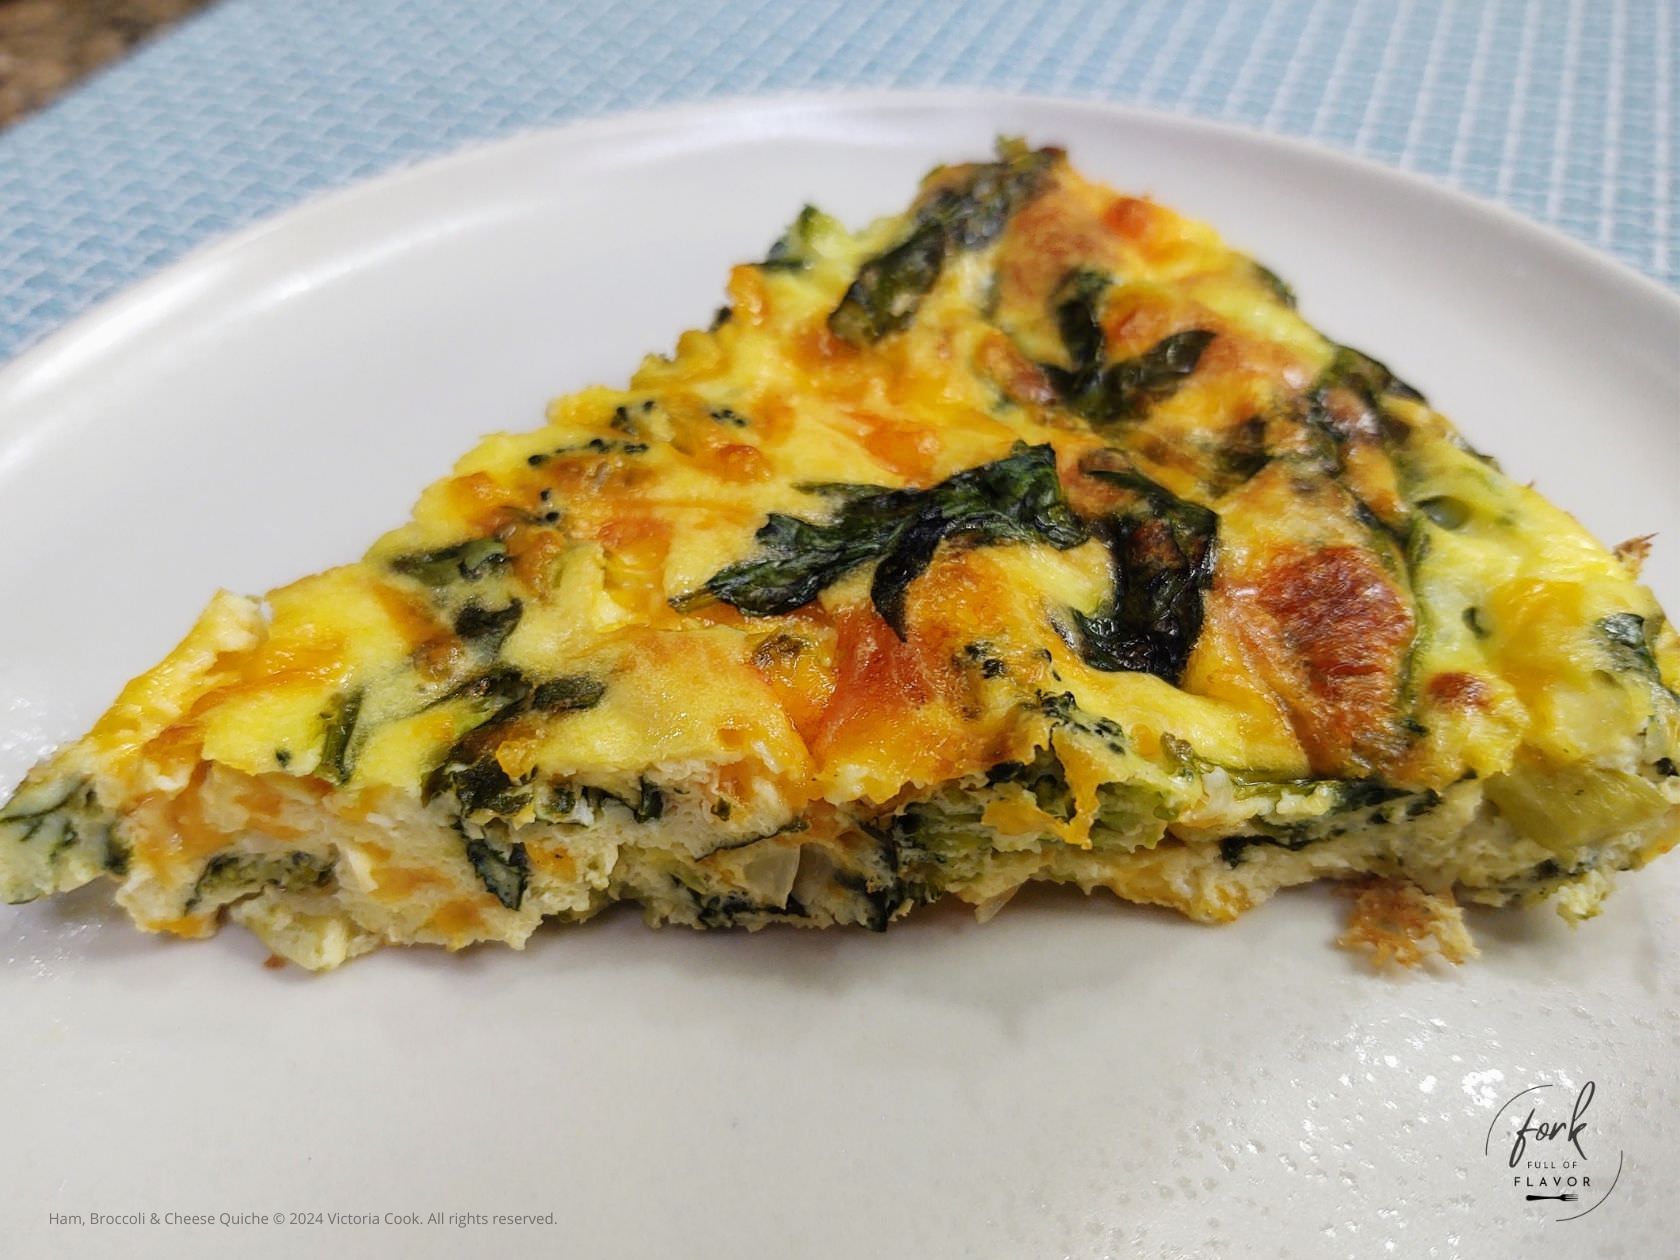 Broccoli, Ham and Cheese Quiche ready to eat on a plate